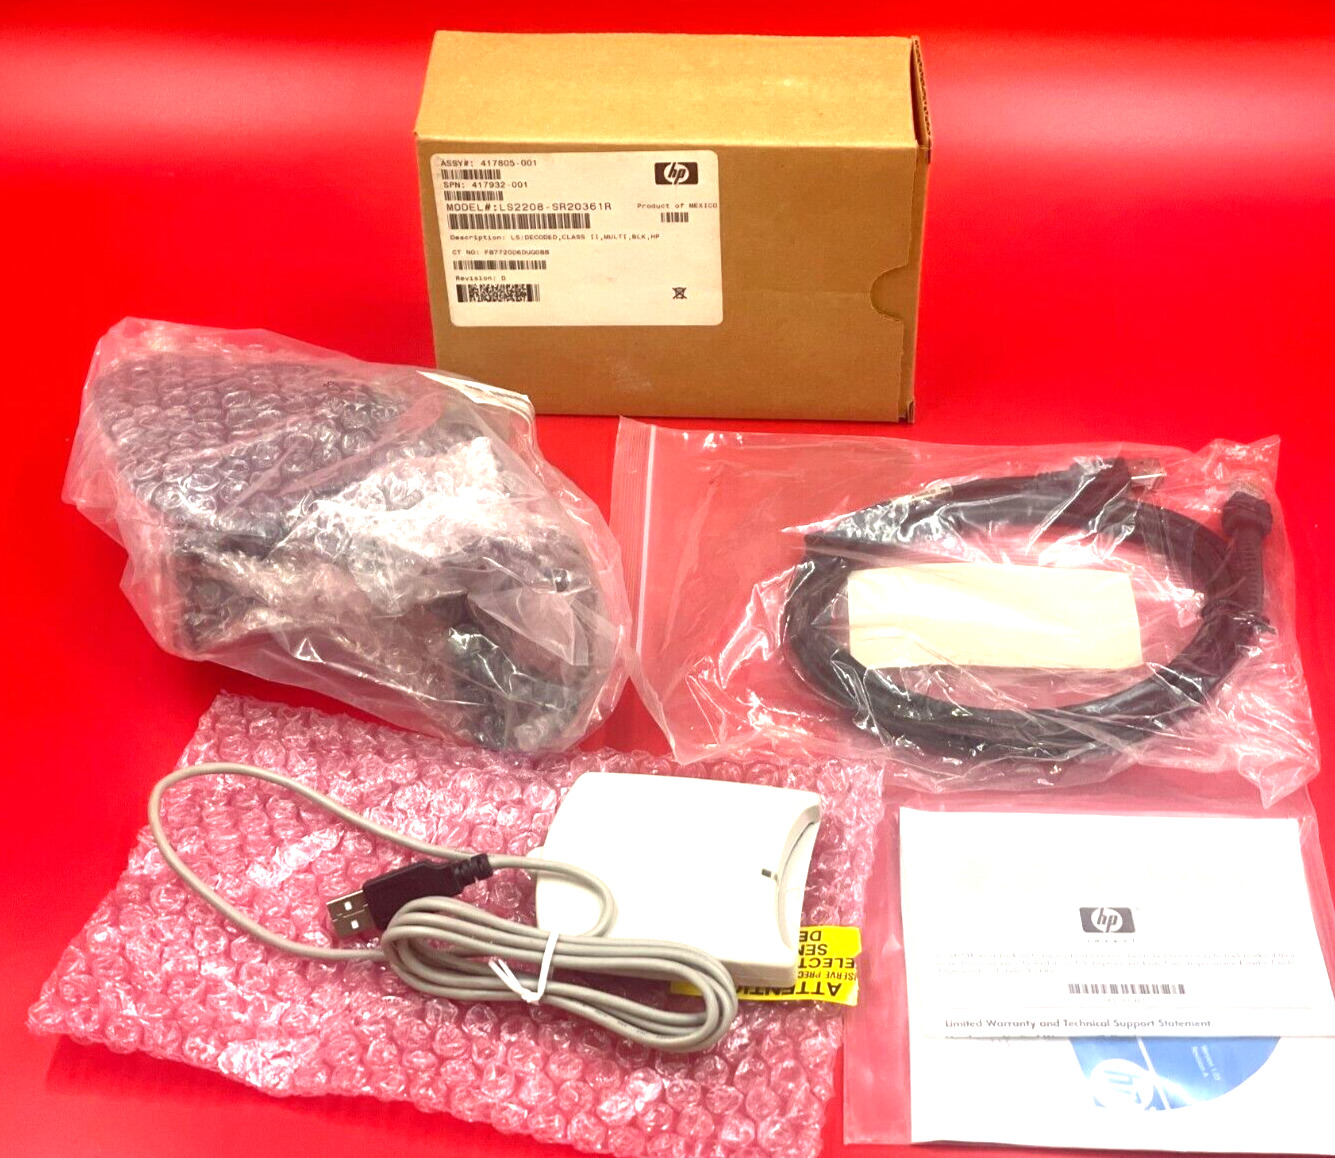 HP USB Barcode Scanner EY022AA ✅ ❤️️ ✅ ❤️️ NEW SEALED INSIDE ✅ ❤️️ ✅ ❤️️